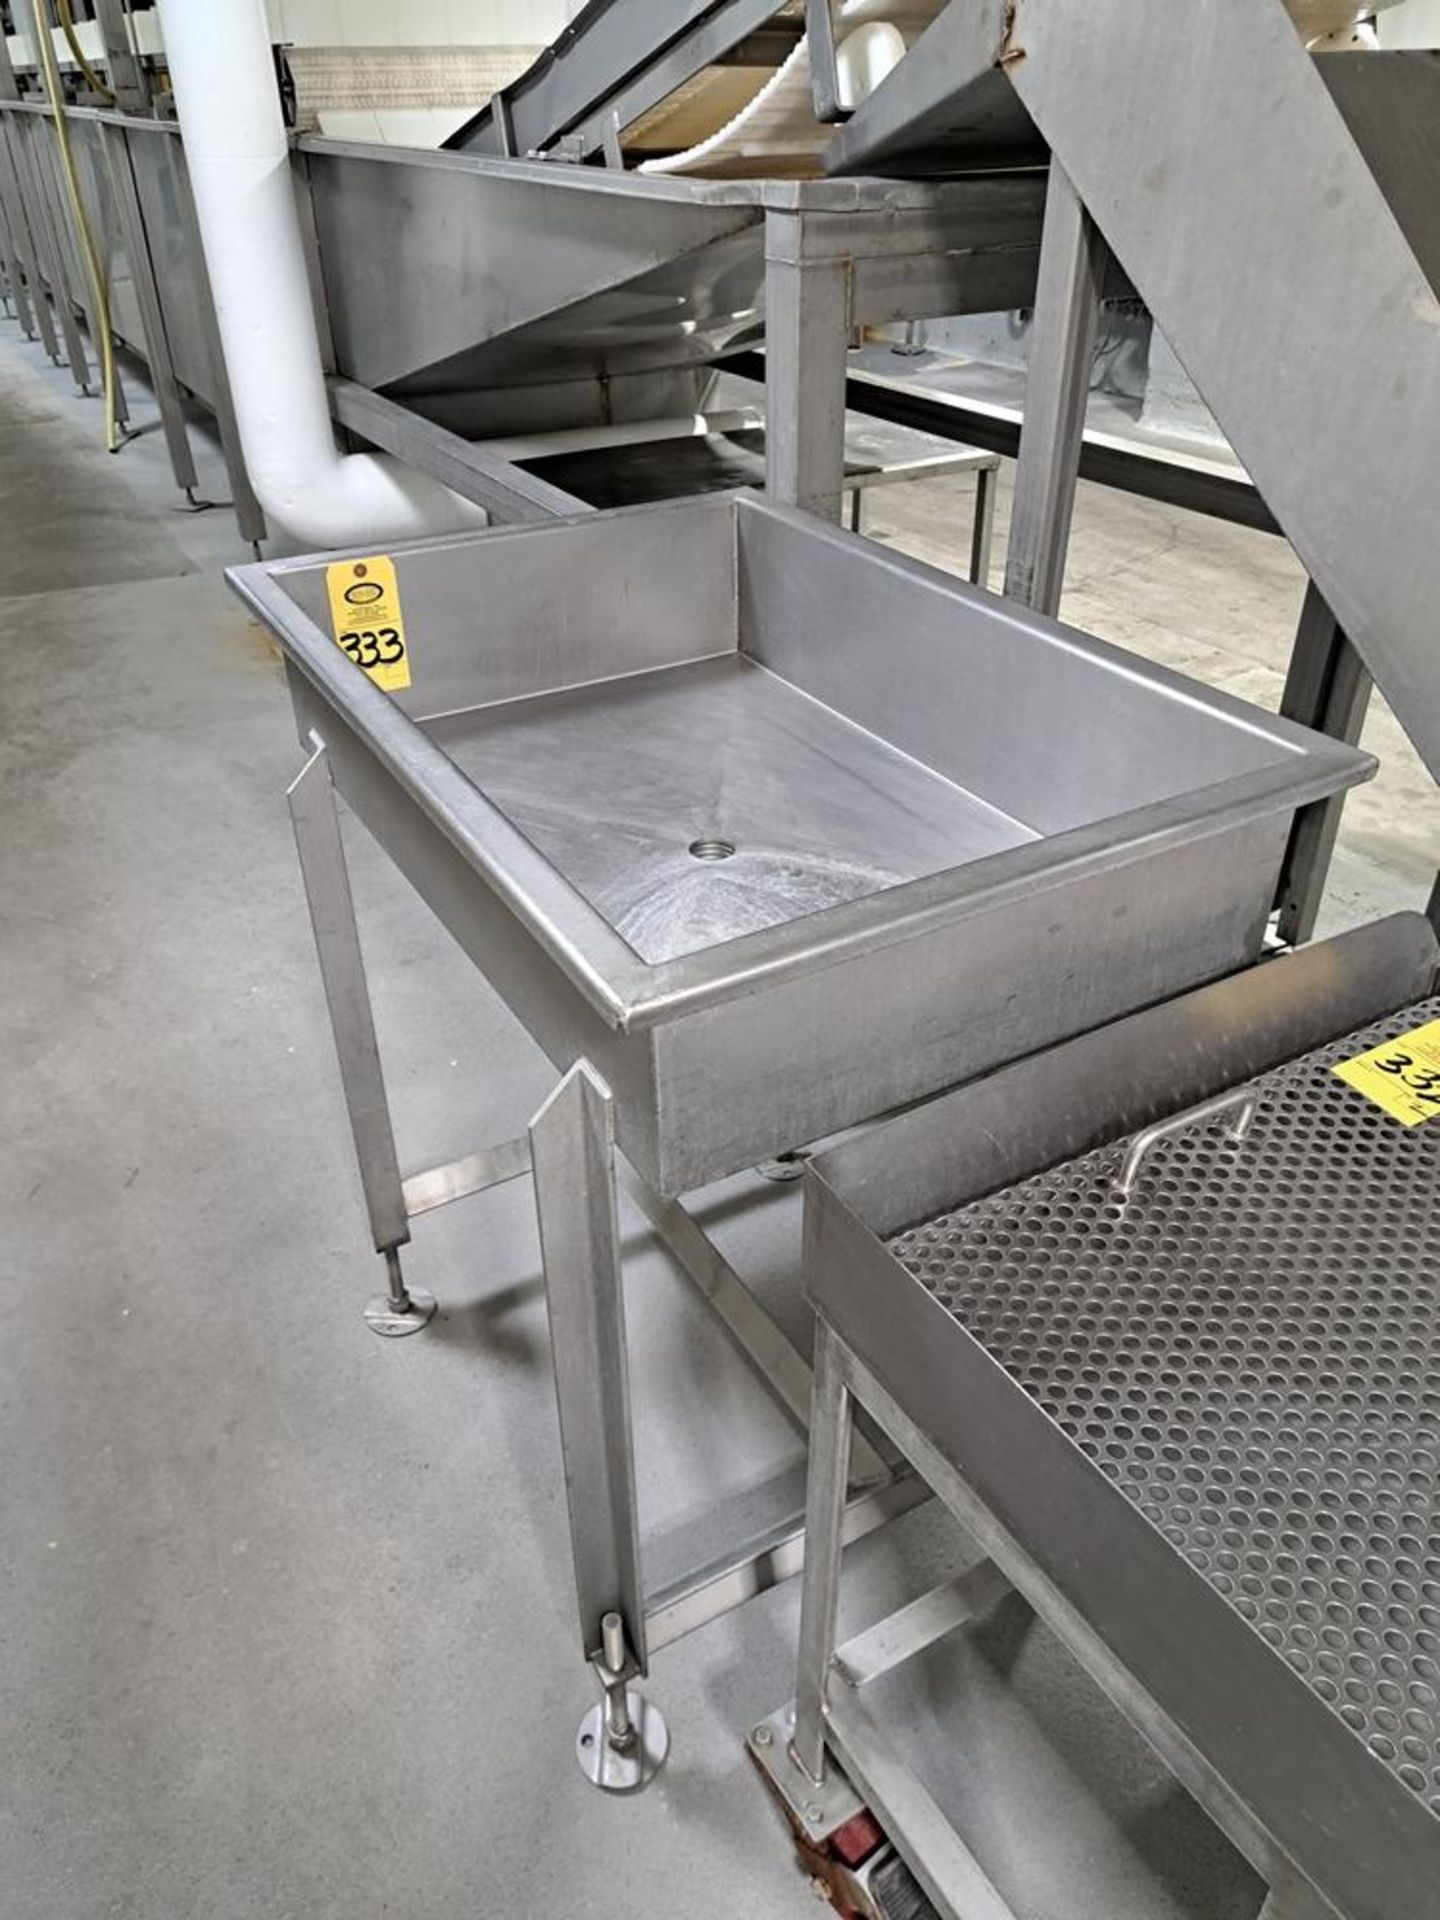 Stainless Steel Trough, 24" W X 38" L X 32" T, 8" deep center drain: Required Loading Fee $50.00,